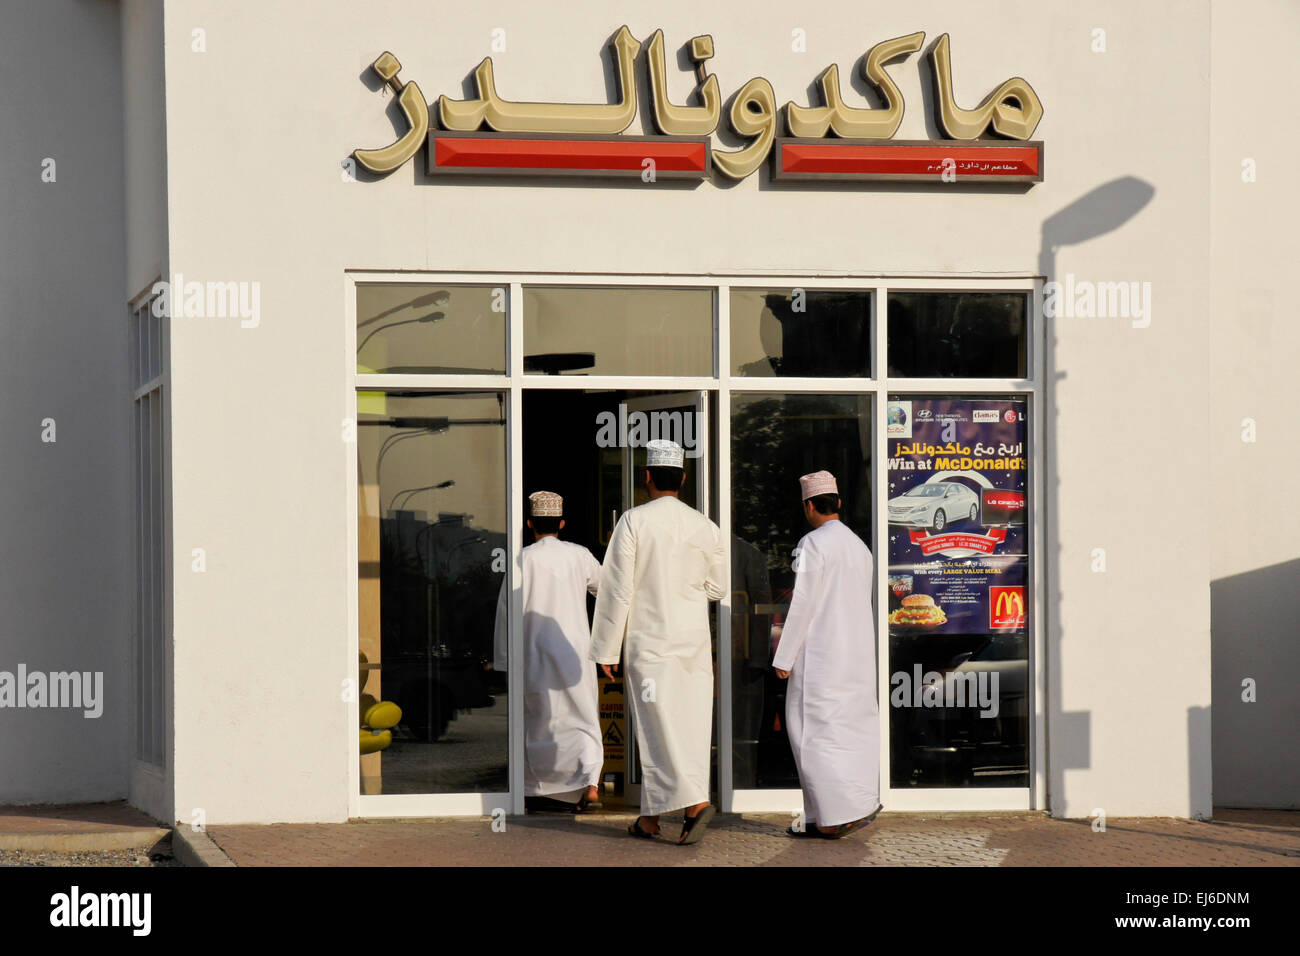 McDonald's in Muscat, Sultanate of Oman Stock Photo